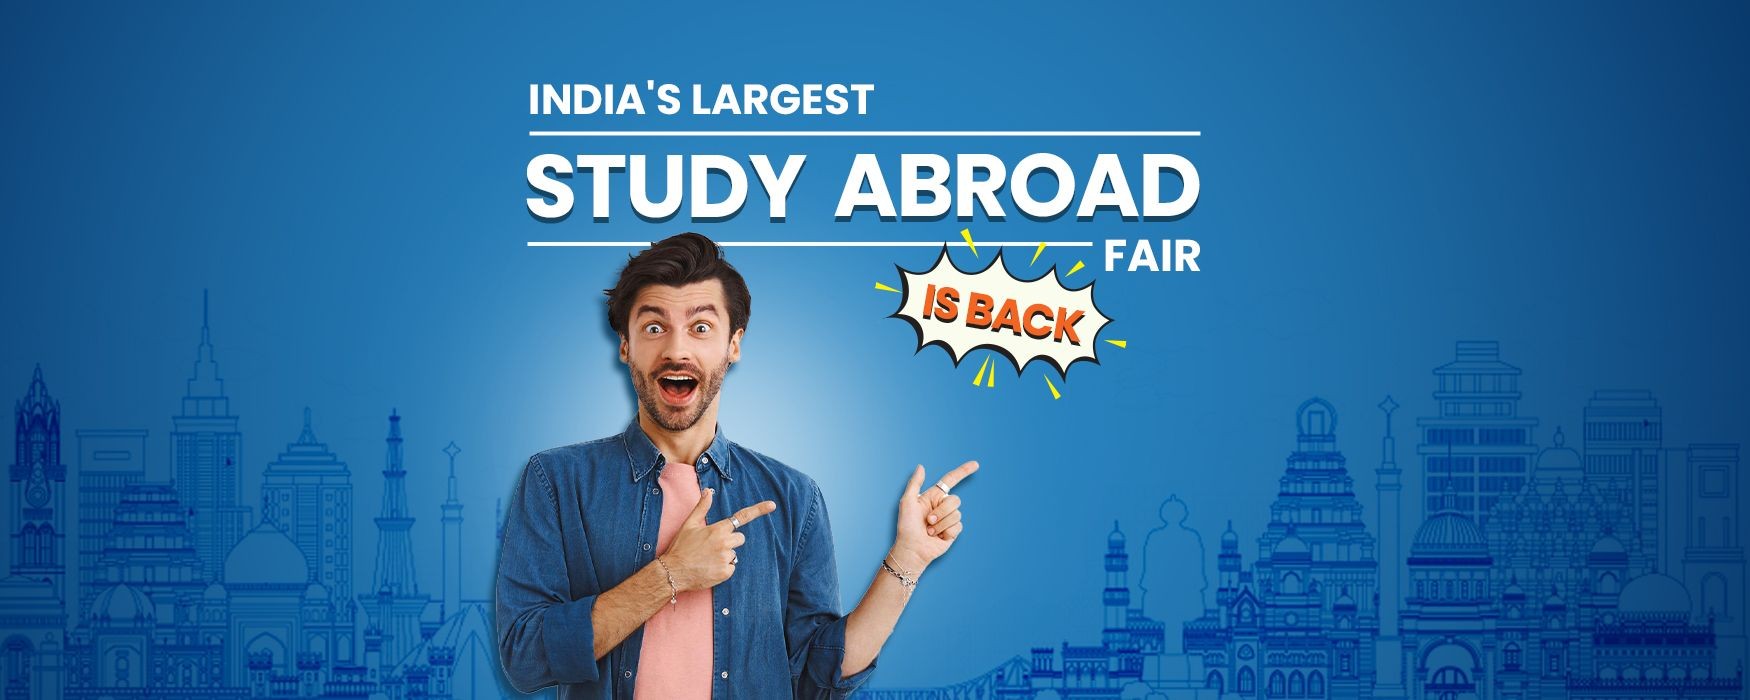 India's-Largest-Study-Abroad-Fair-is-Back-With-A-Bang.jpg